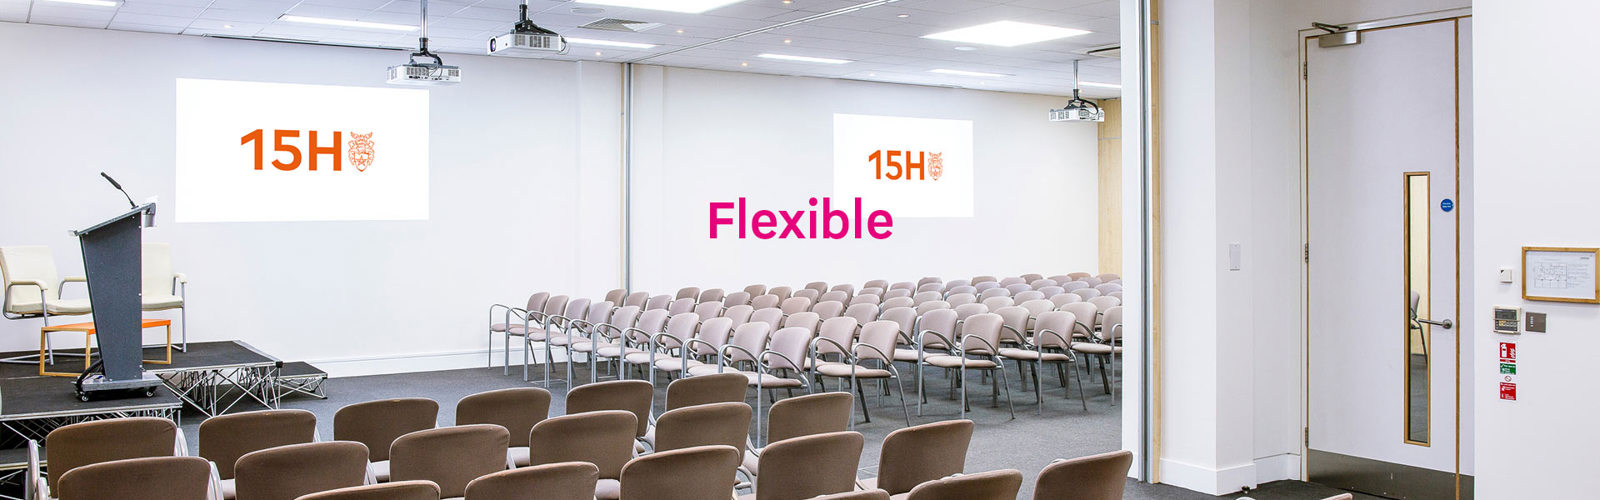 15Hatfields conference room with the word 'Flexible'